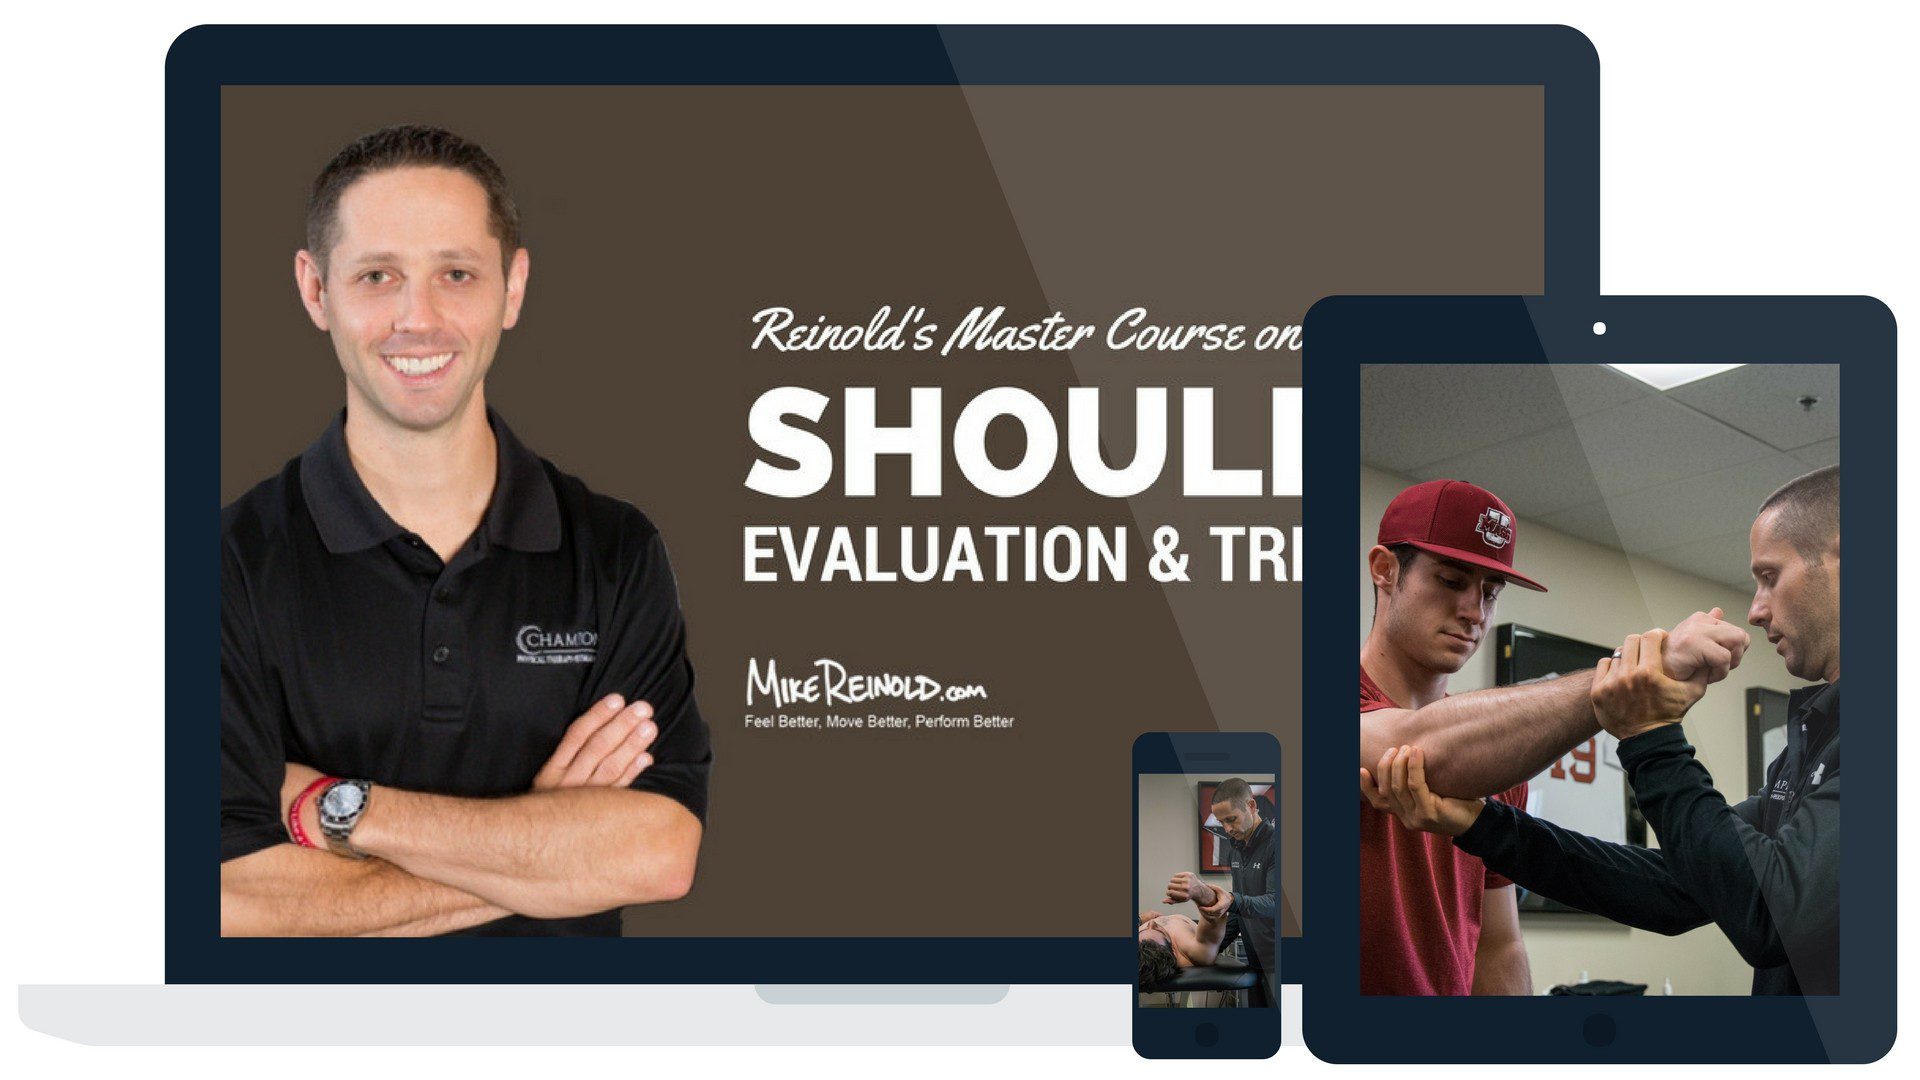 Mike Reinold - Online Shoulder Evaluation and Treatment Course